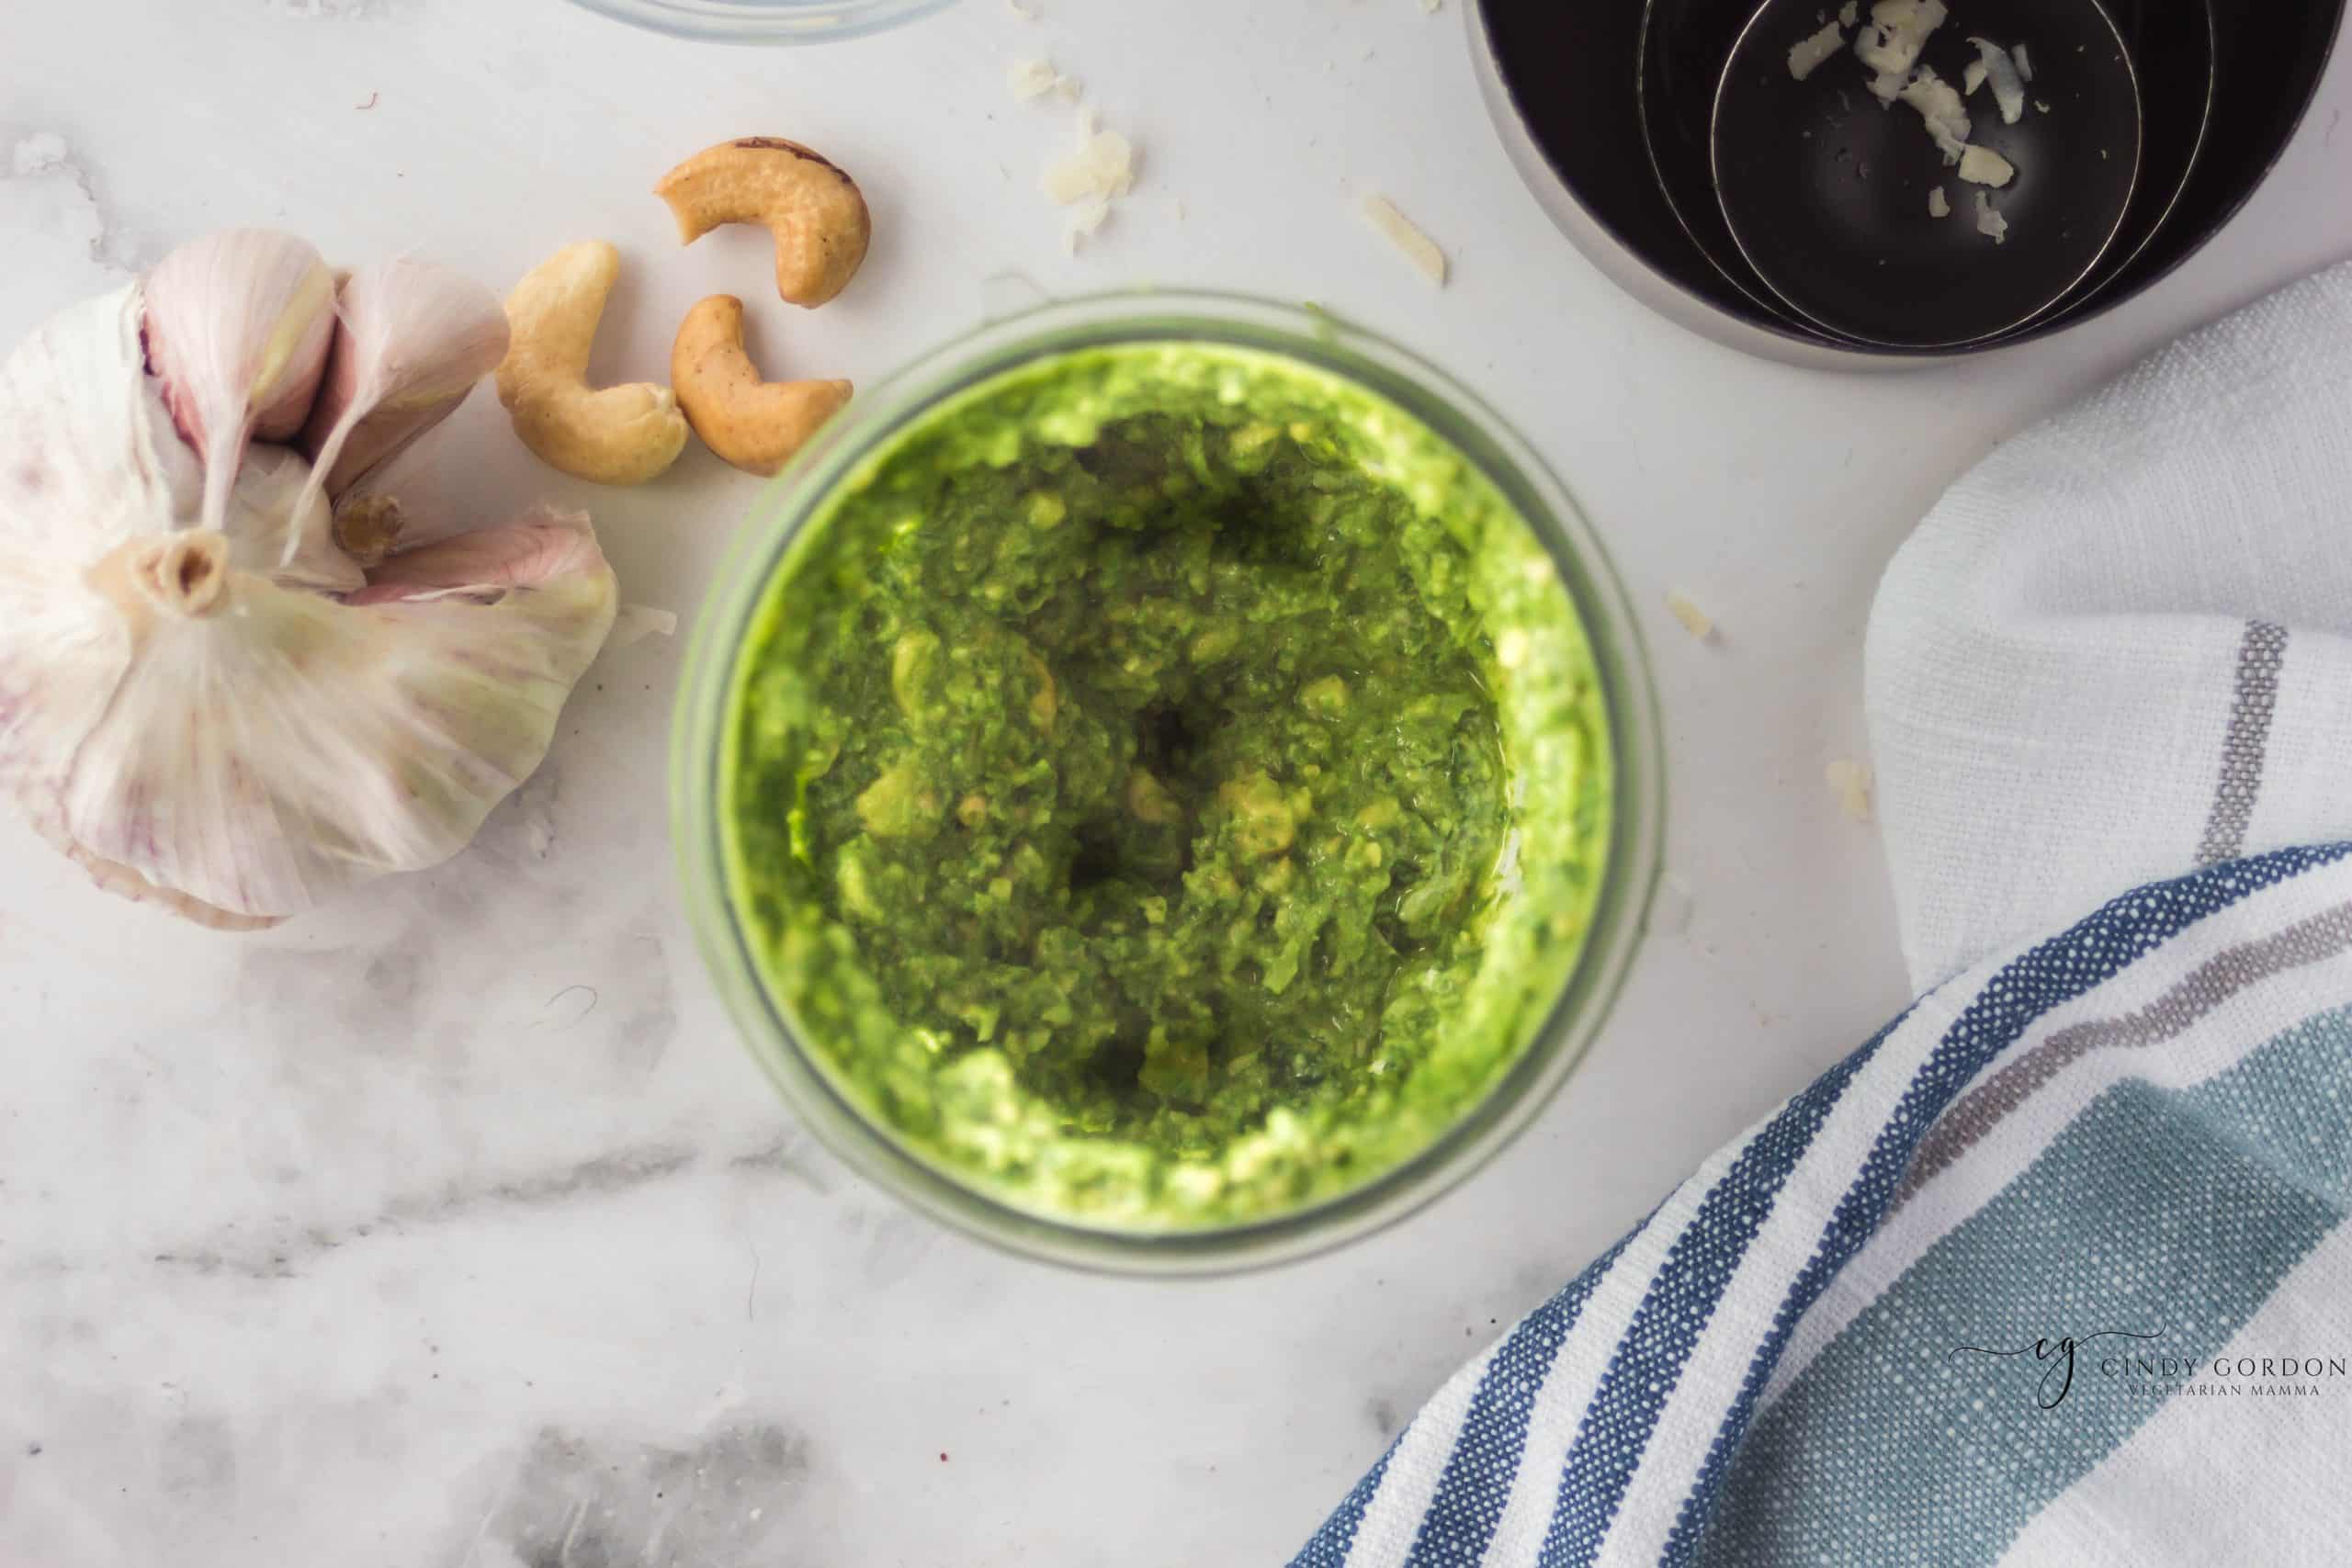 top view photo of cashew pesto that has been blended together. The jar is surrounded by cashews, garlic cloves, and a kitchen towel